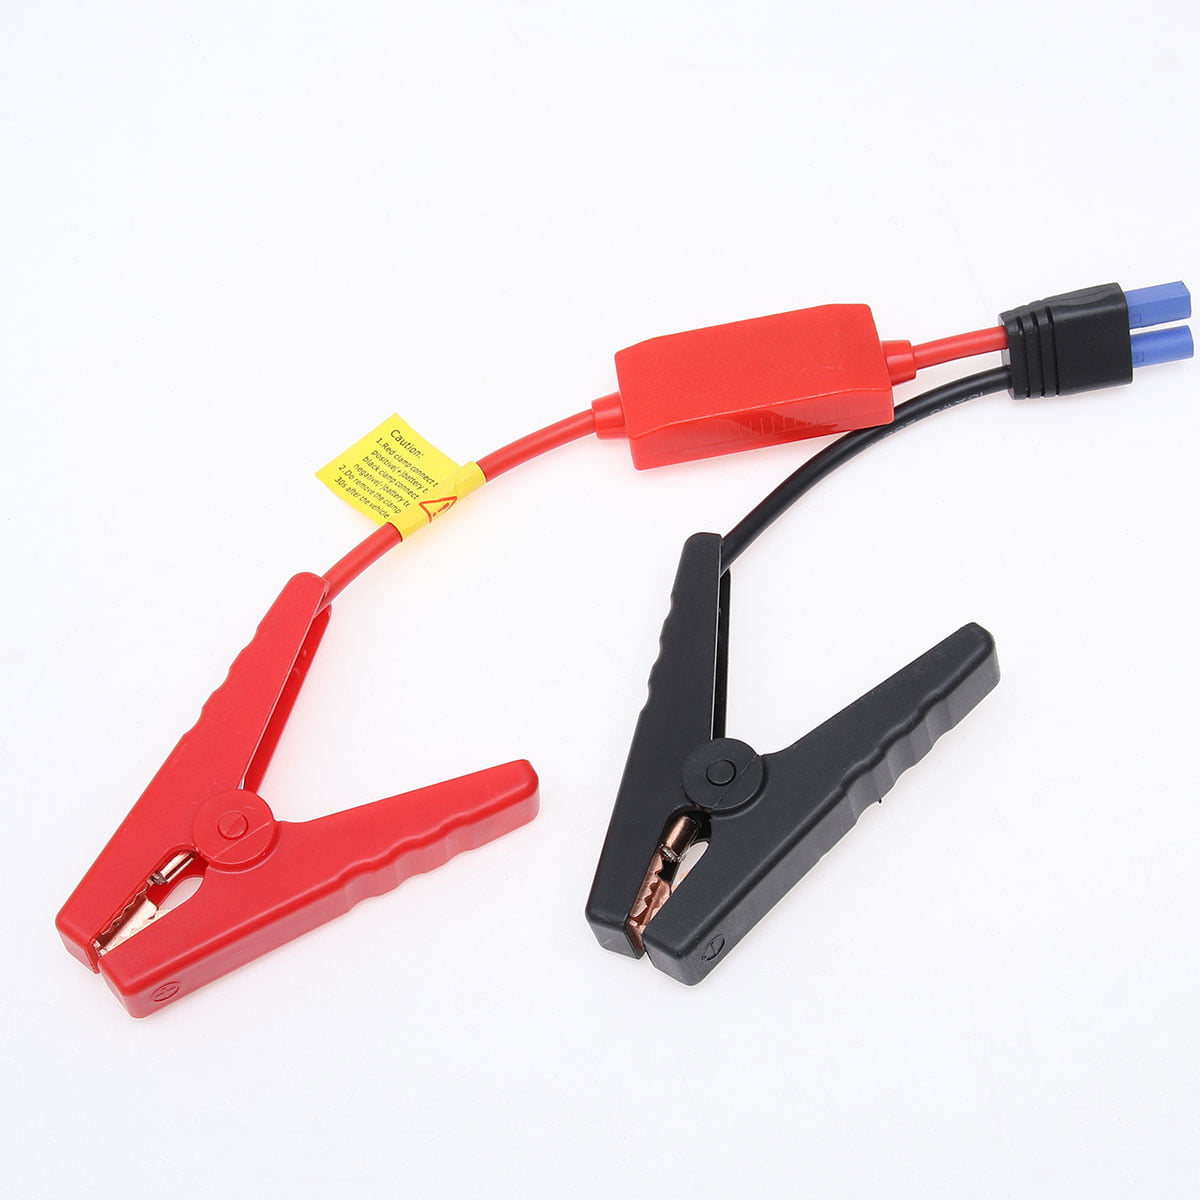 AYECEHI EC5 Booster Jumper Cables Automotive Replacement Jump Starter EC5 Connector Emergency Alligator Clip to EC5 Cable for 12V Portable Car Jump Starter 